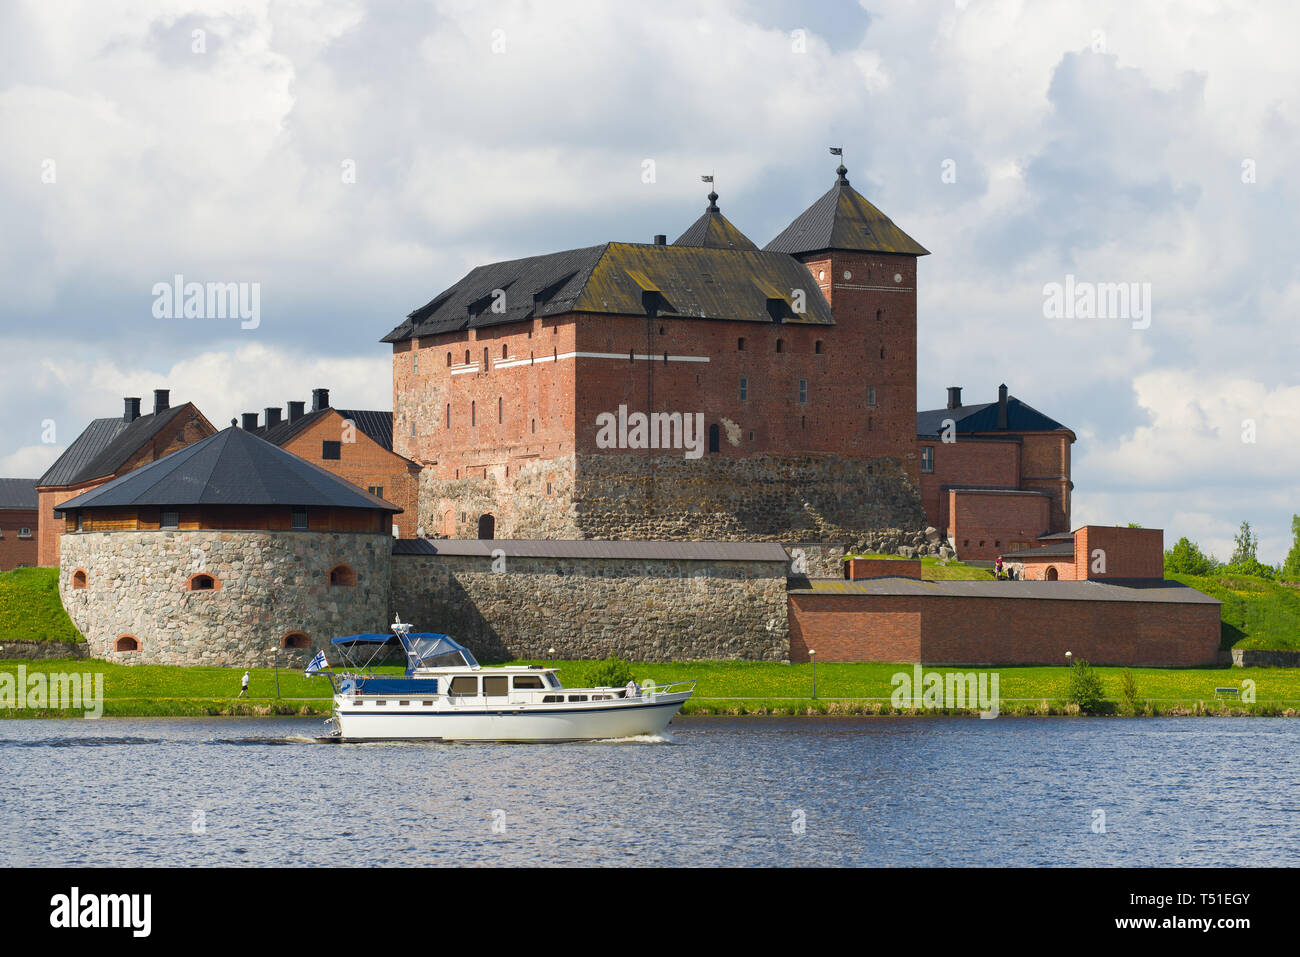 HAMEENLINA, FINLAND - JUNE 10, 2017: The boat on the Vanayavesi  lake against the background of the Hameenlinna fortress Stock Photo